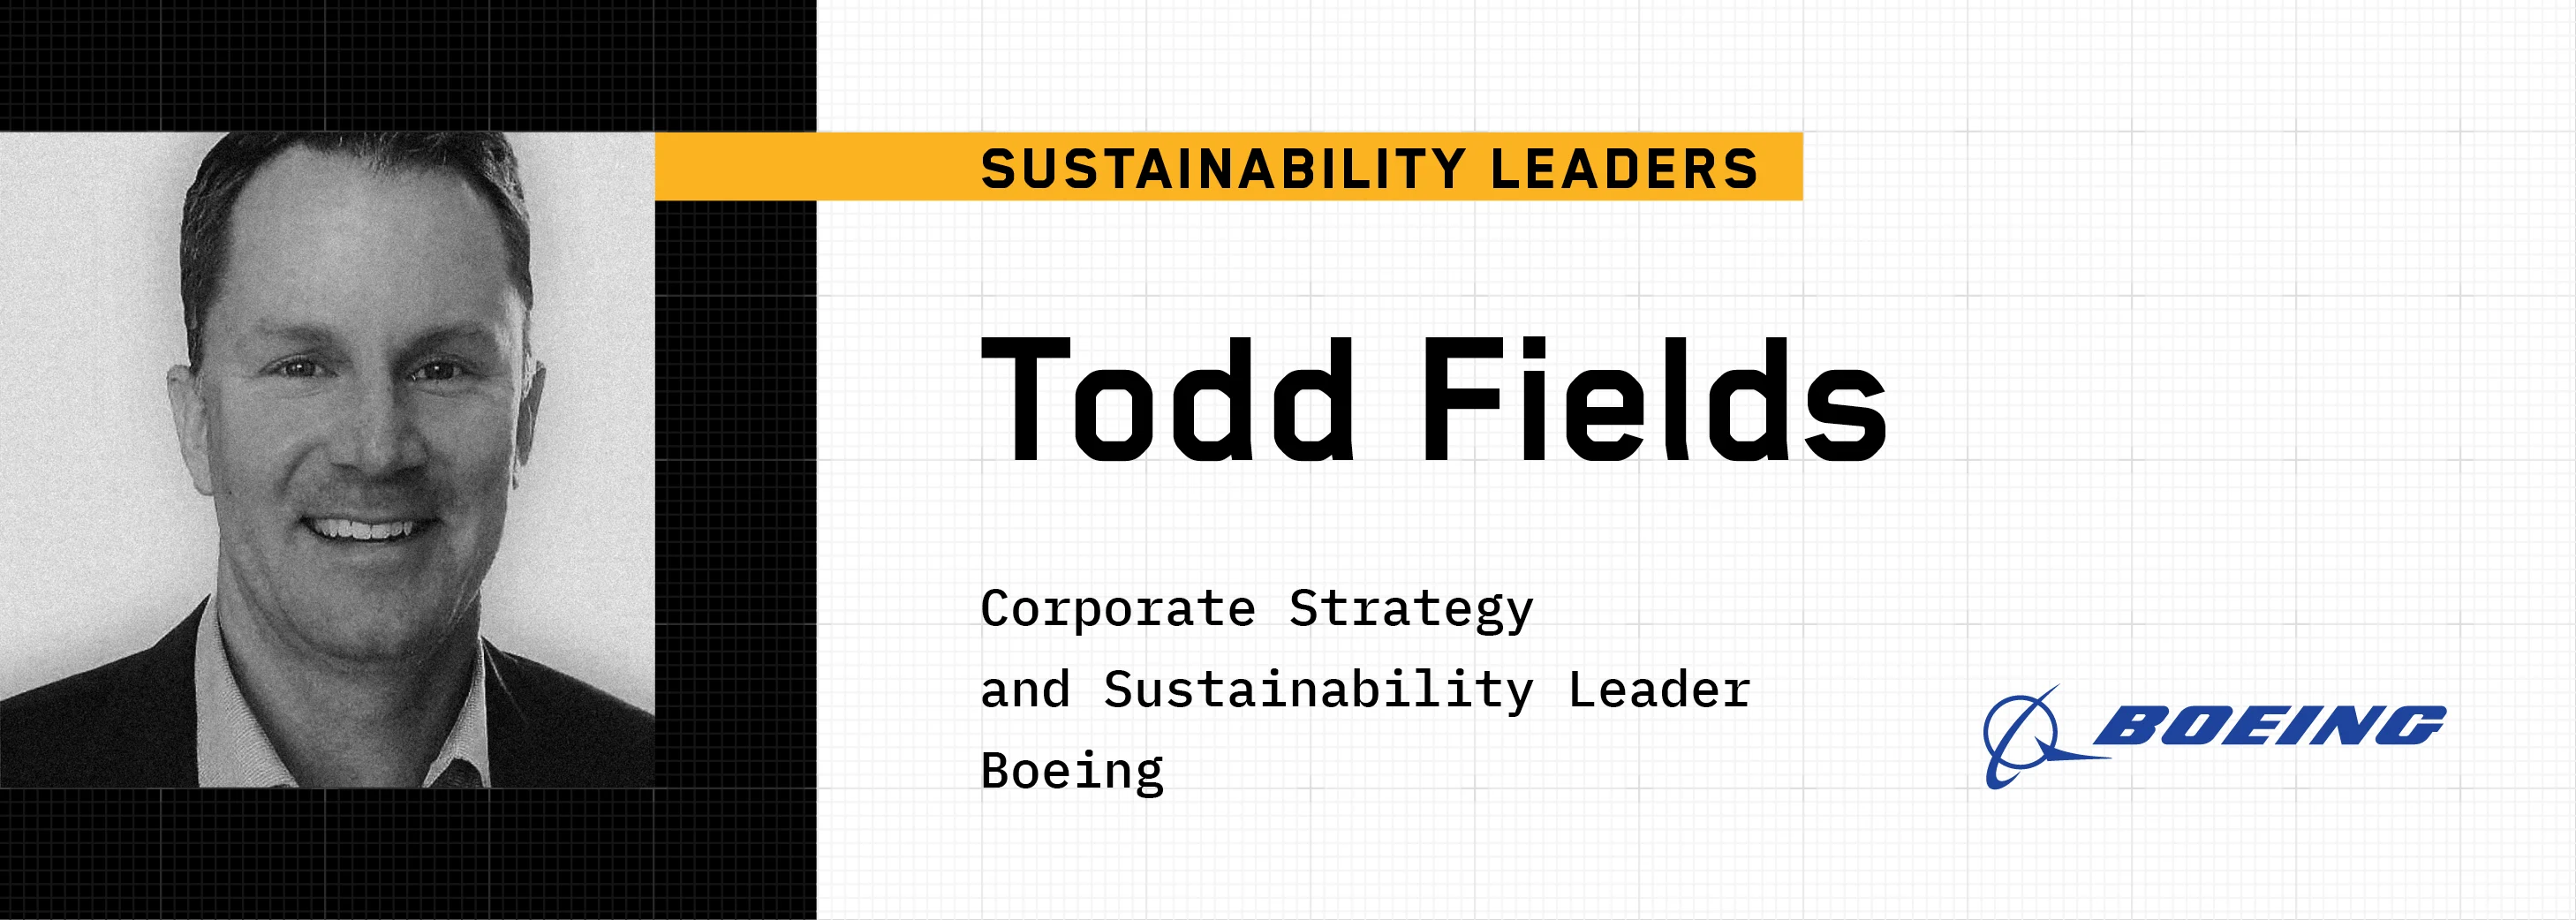 todd fields Boeing corporate strategy and sustainability leader